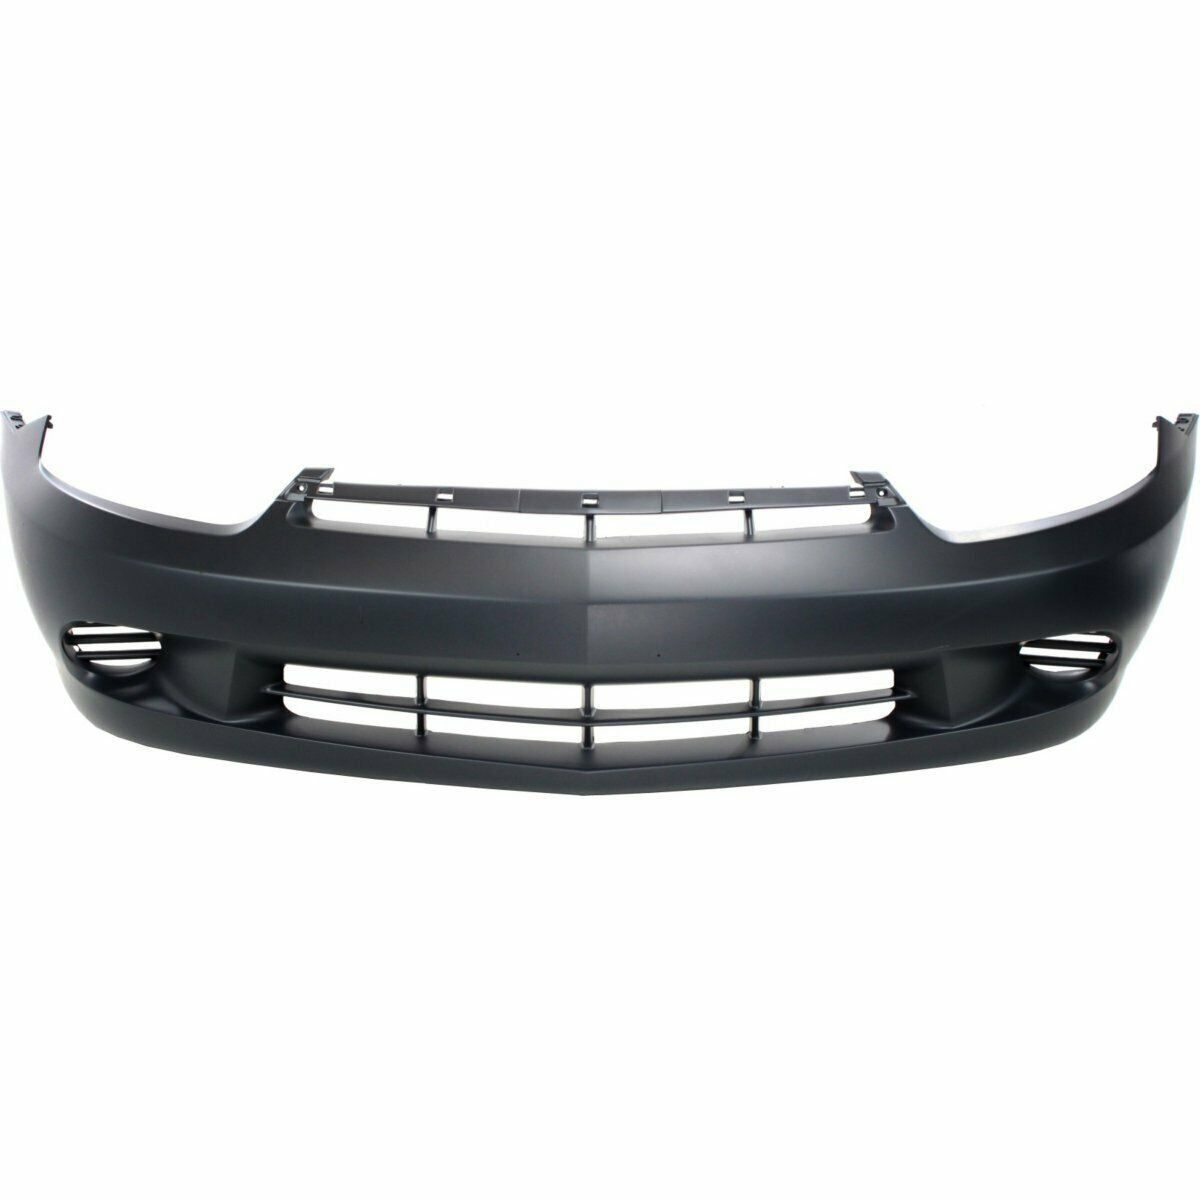 2003-2005 Chevy Cavalier Front Bumper Painted to Match